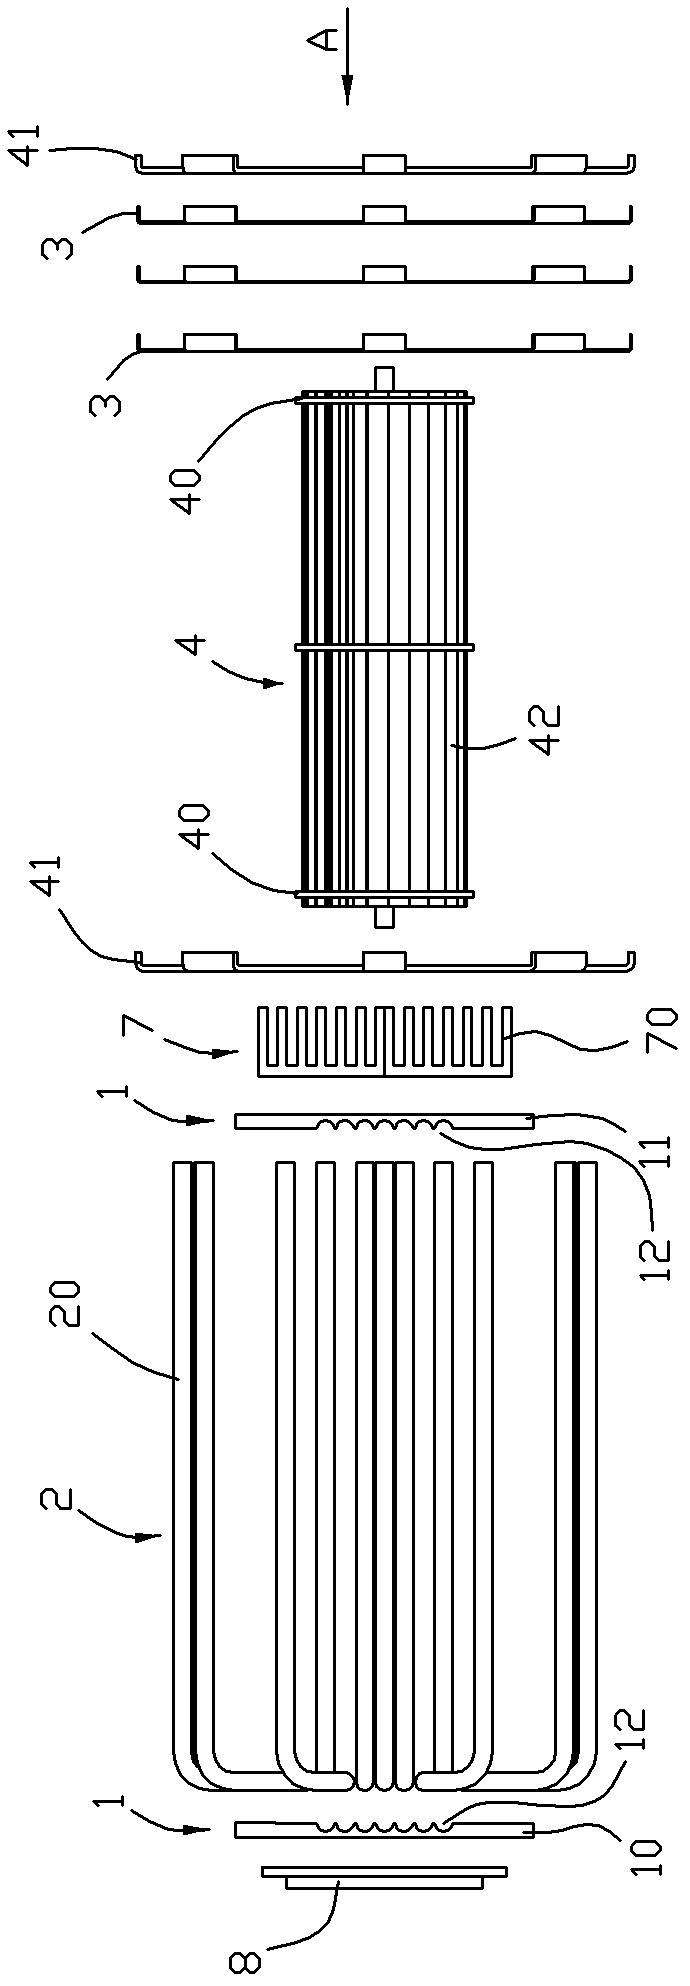 Heat sink and led lamp with heat sink